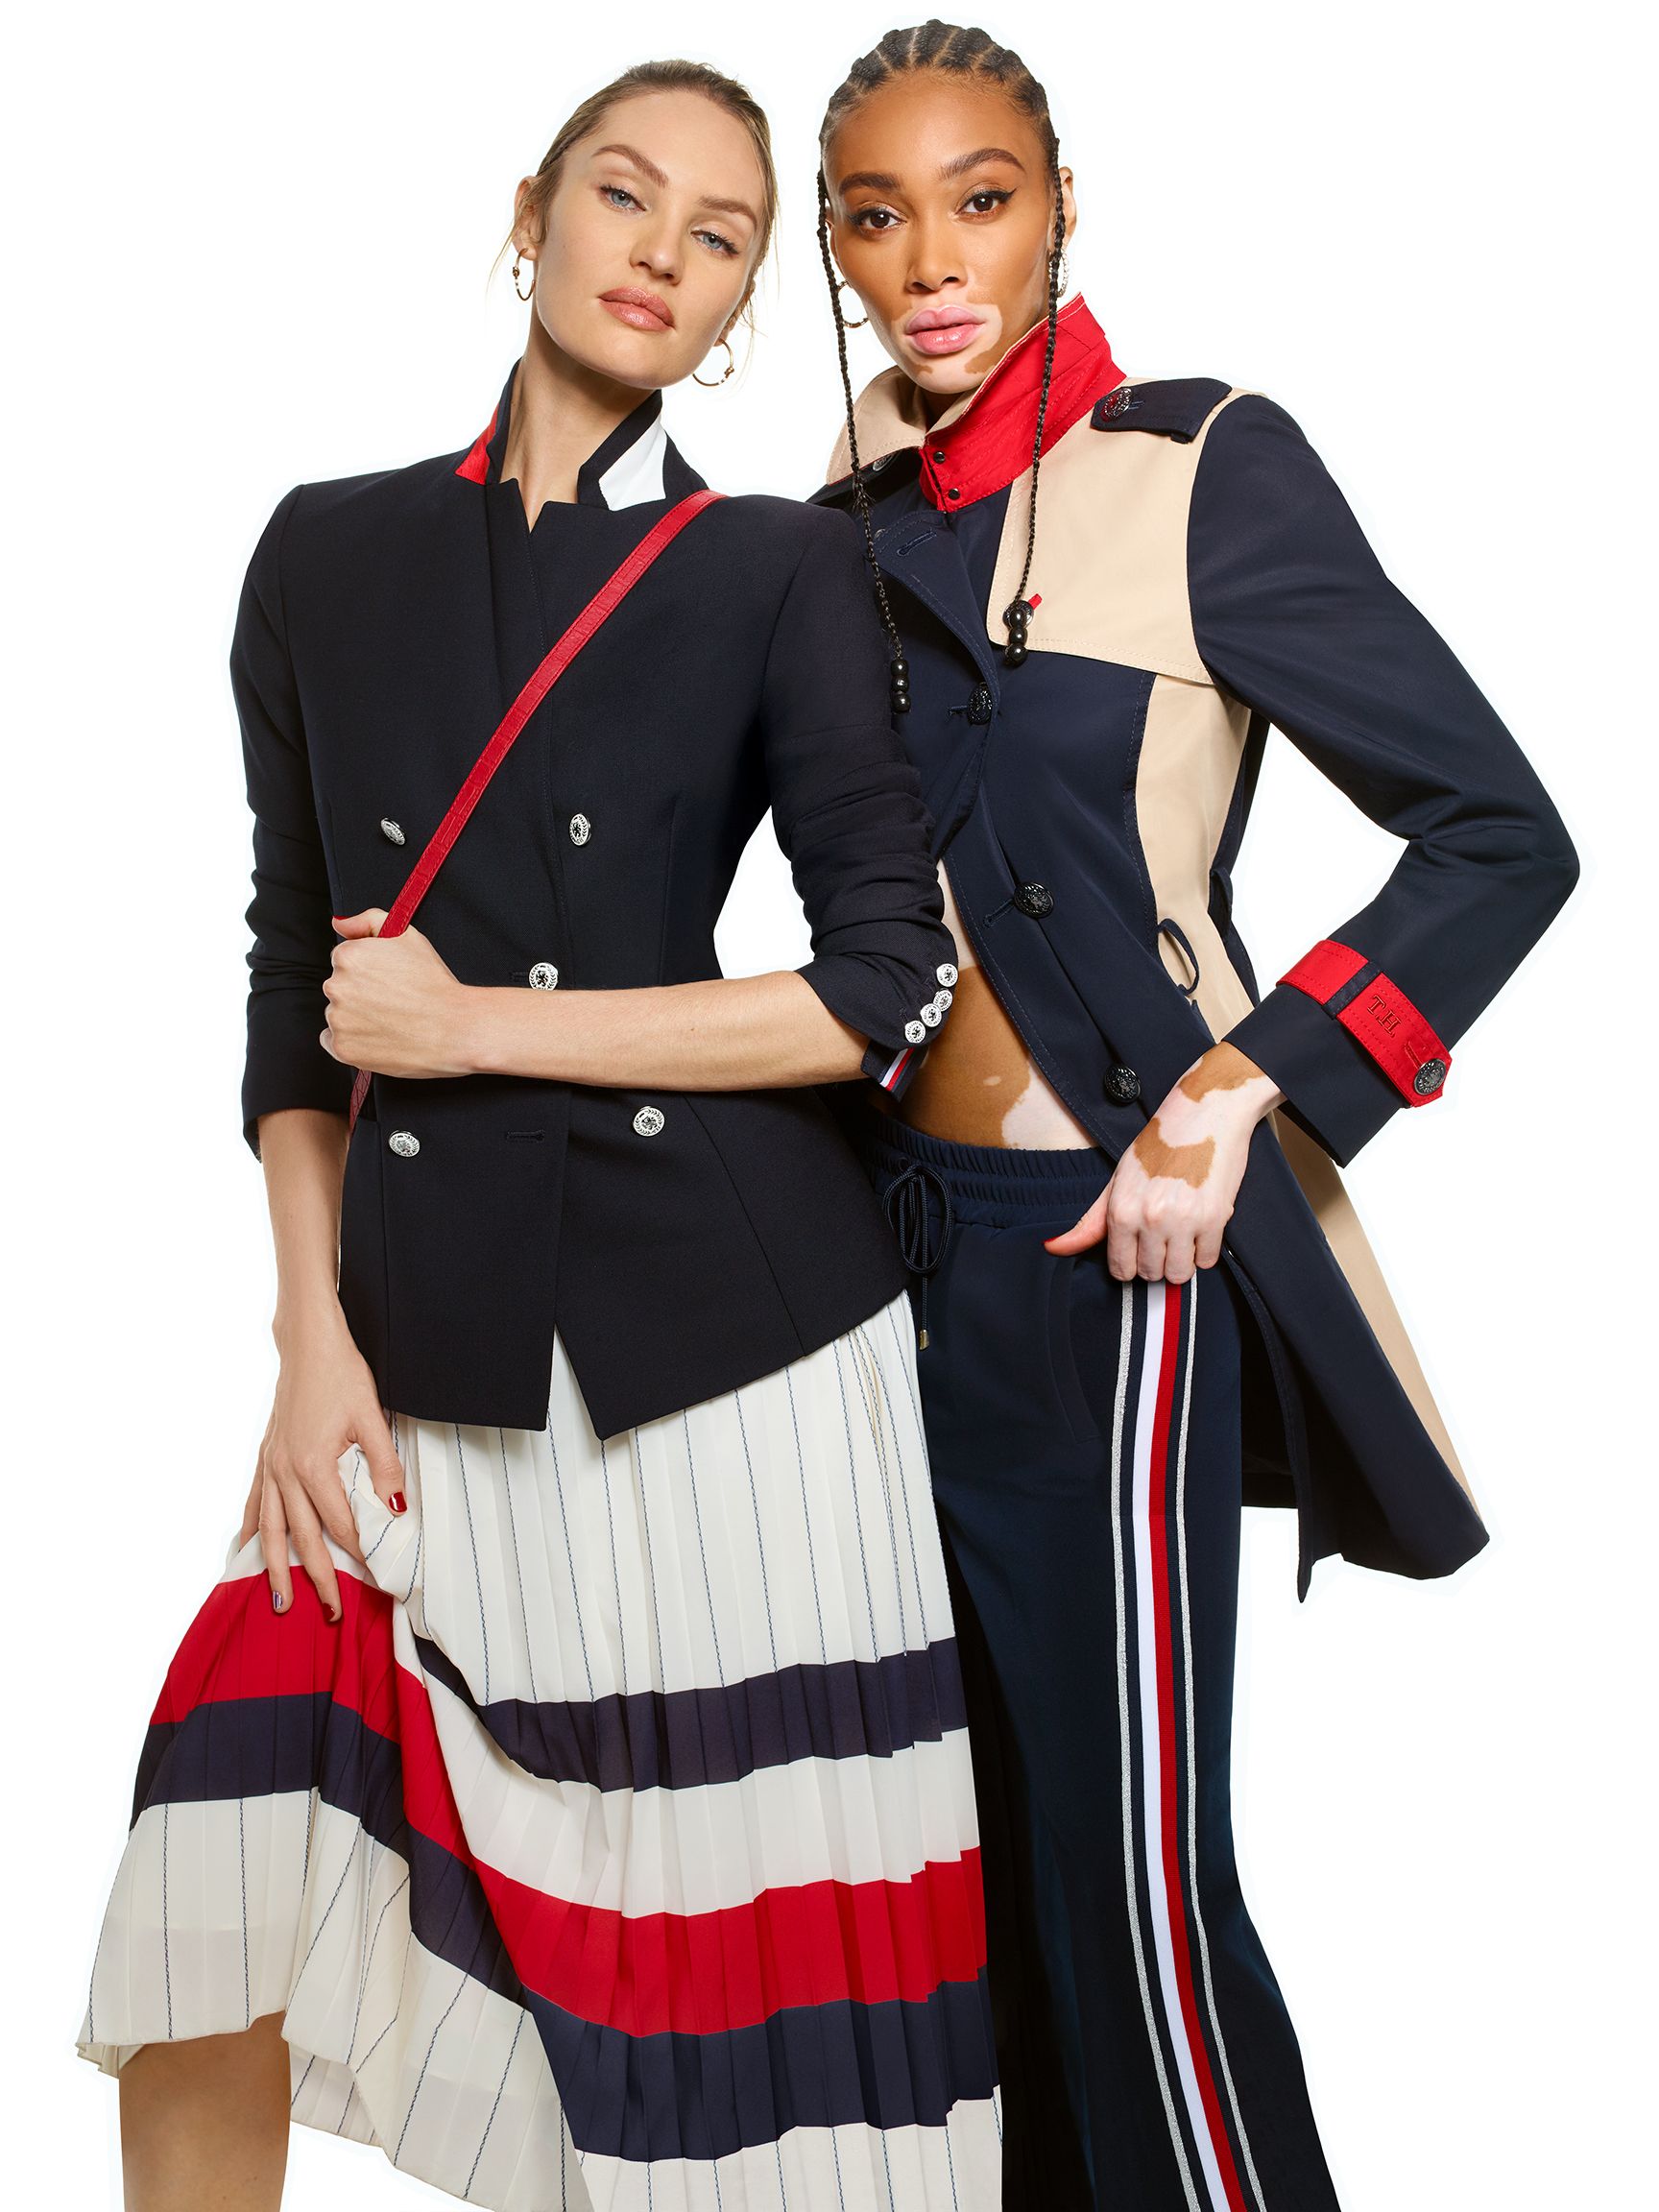 Introducing Tommy Hilfiger Icons 